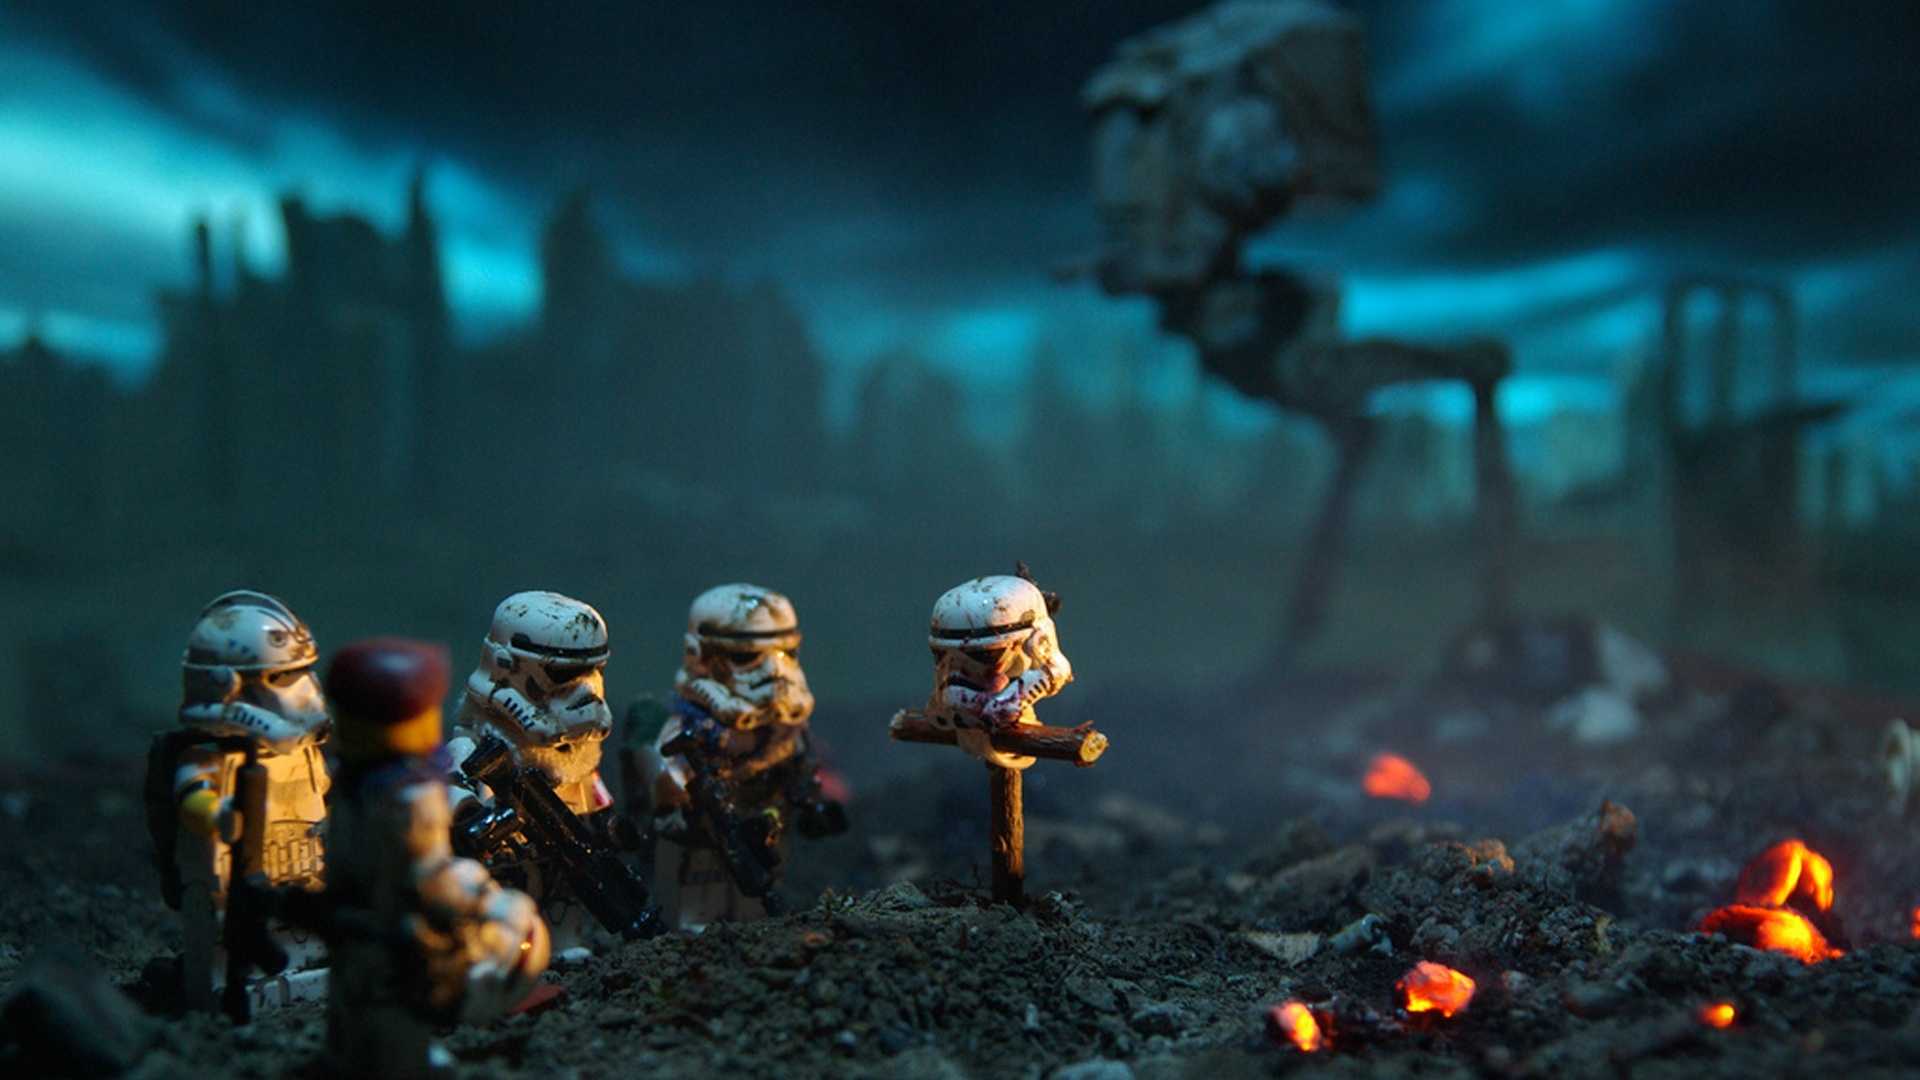 Background Of Lego Star Wars Stormtroopers In Format For Wallpaper